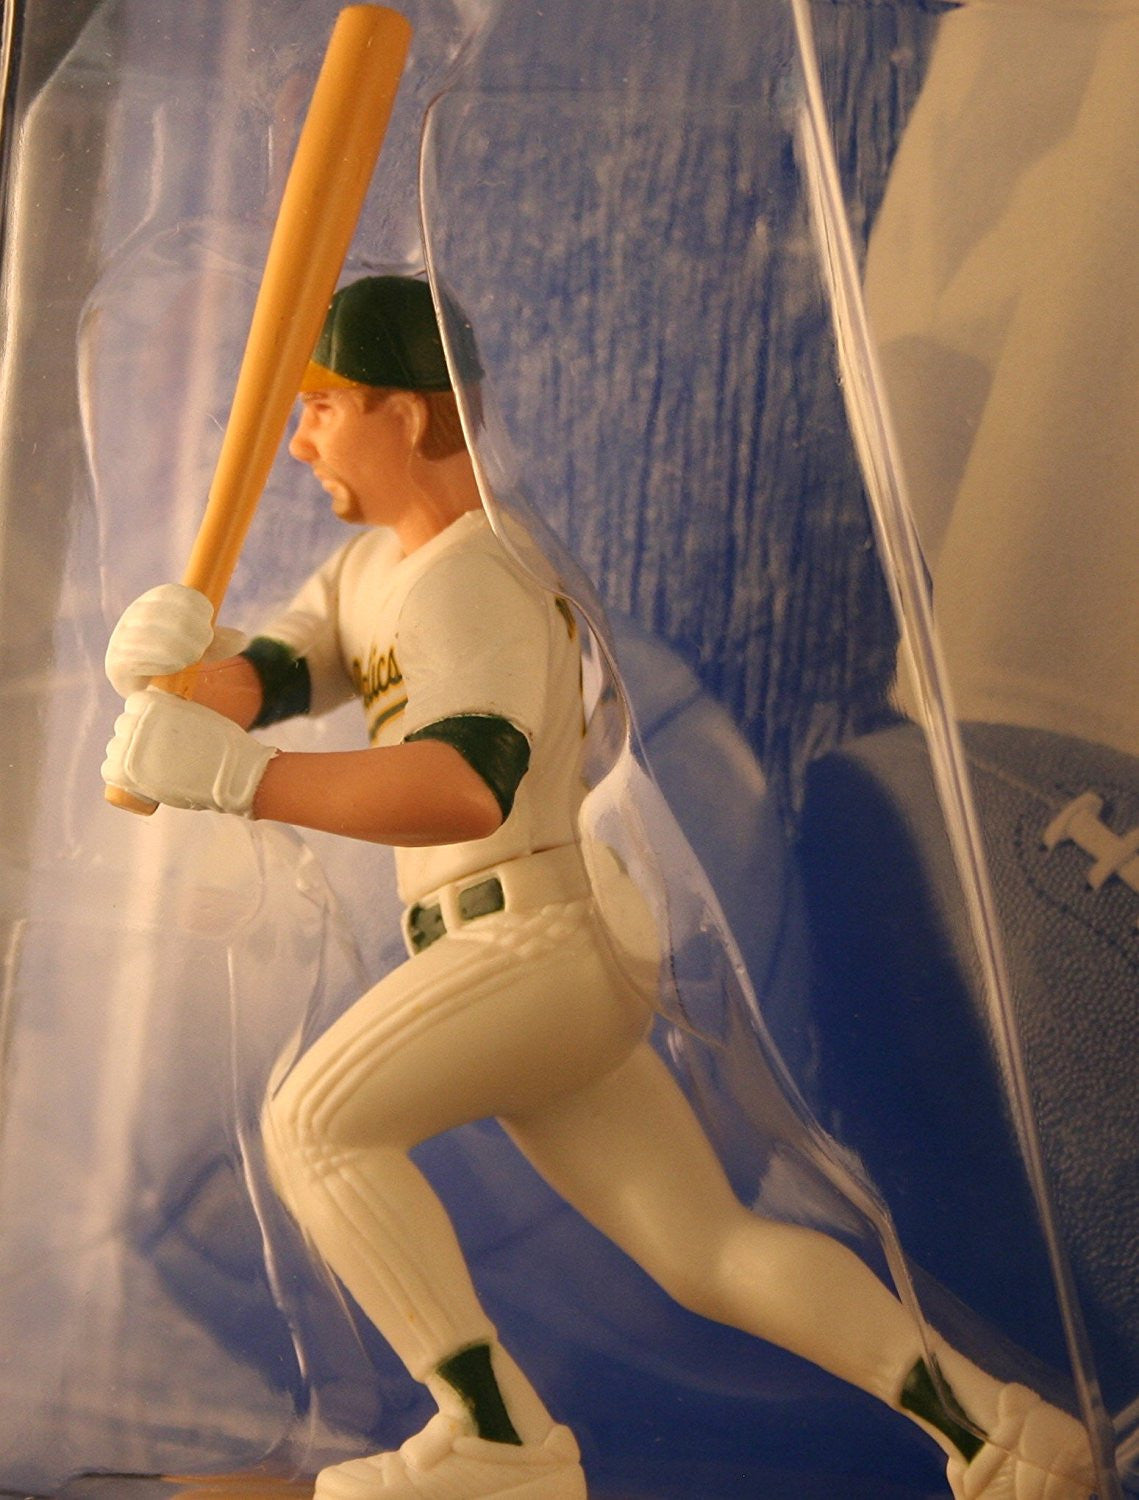 MARK MCGWIRE / OAKLAND A'S & ROGER MARIS / NEW YORK YANKEES 1998 MLB Classic Doubles * Winning Pairs Series * Starting Lineup Action Figures & Exclusive Collector Trading Cards